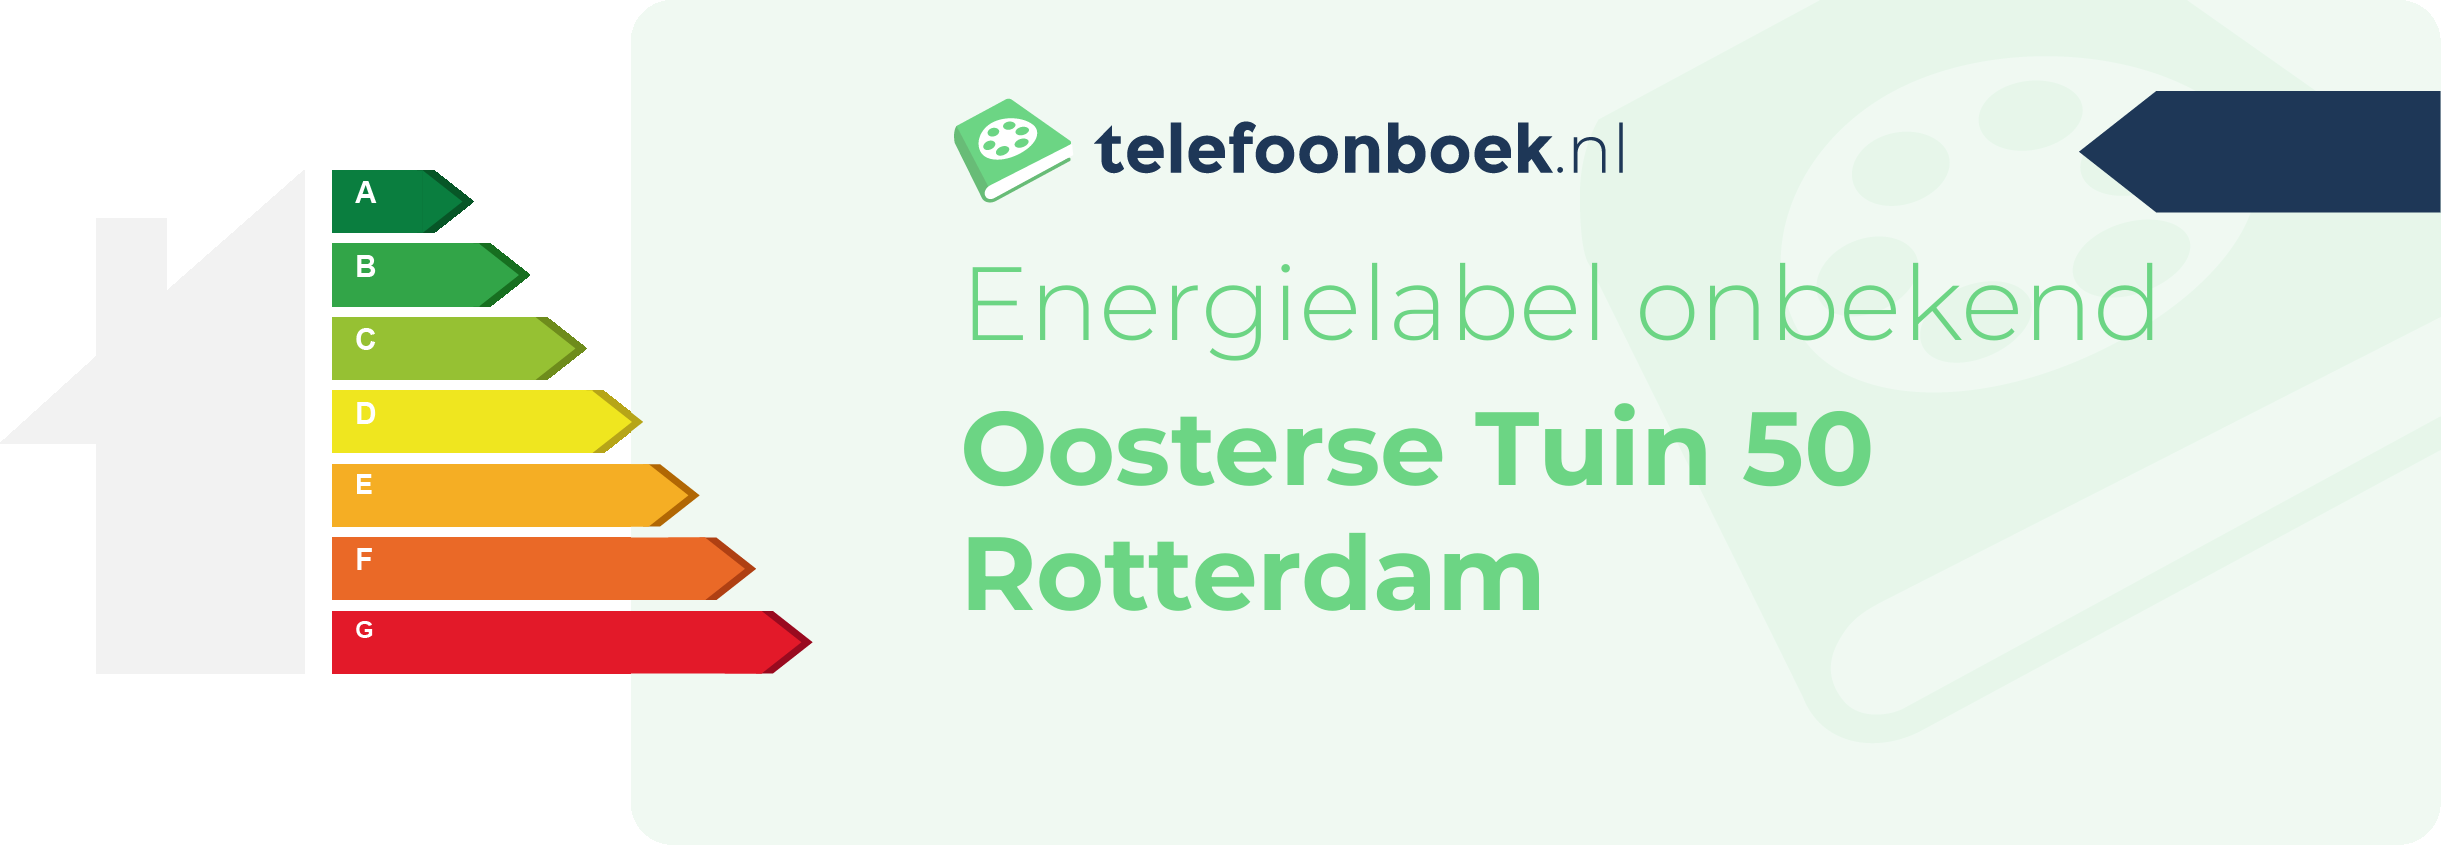 Energielabel Oosterse Tuin 50 Rotterdam